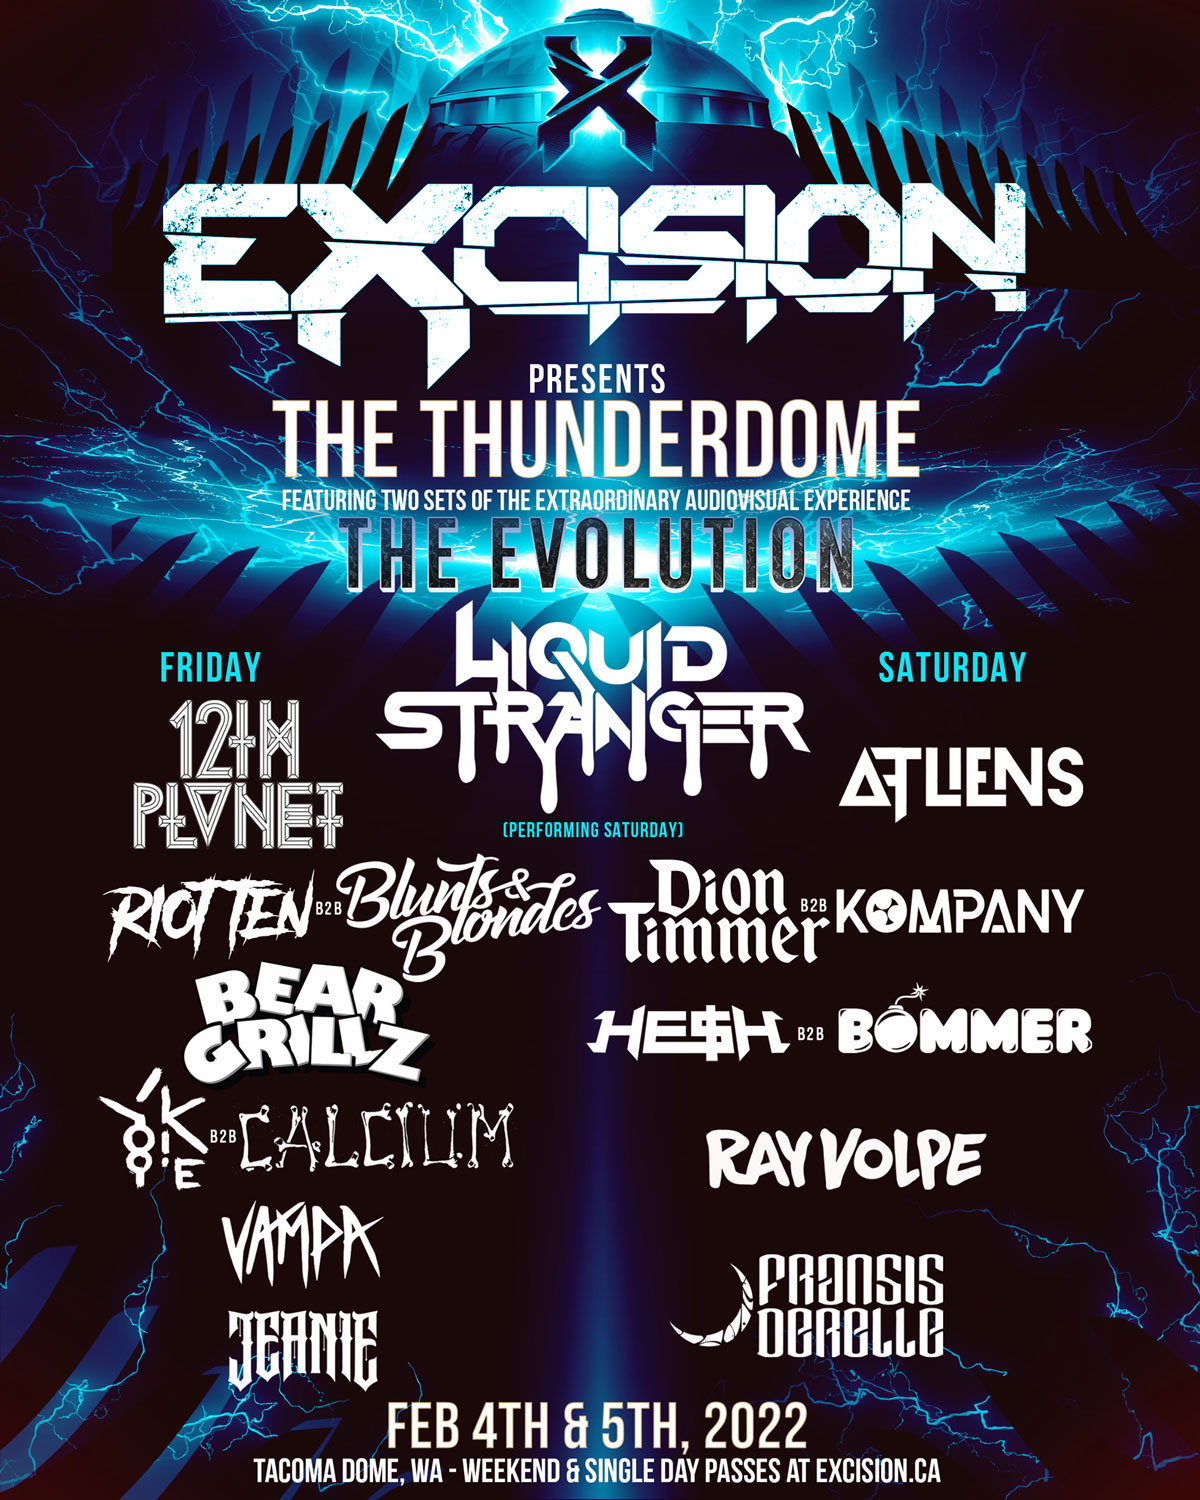 Thunderdome 2022 Tickets On Sale Now!